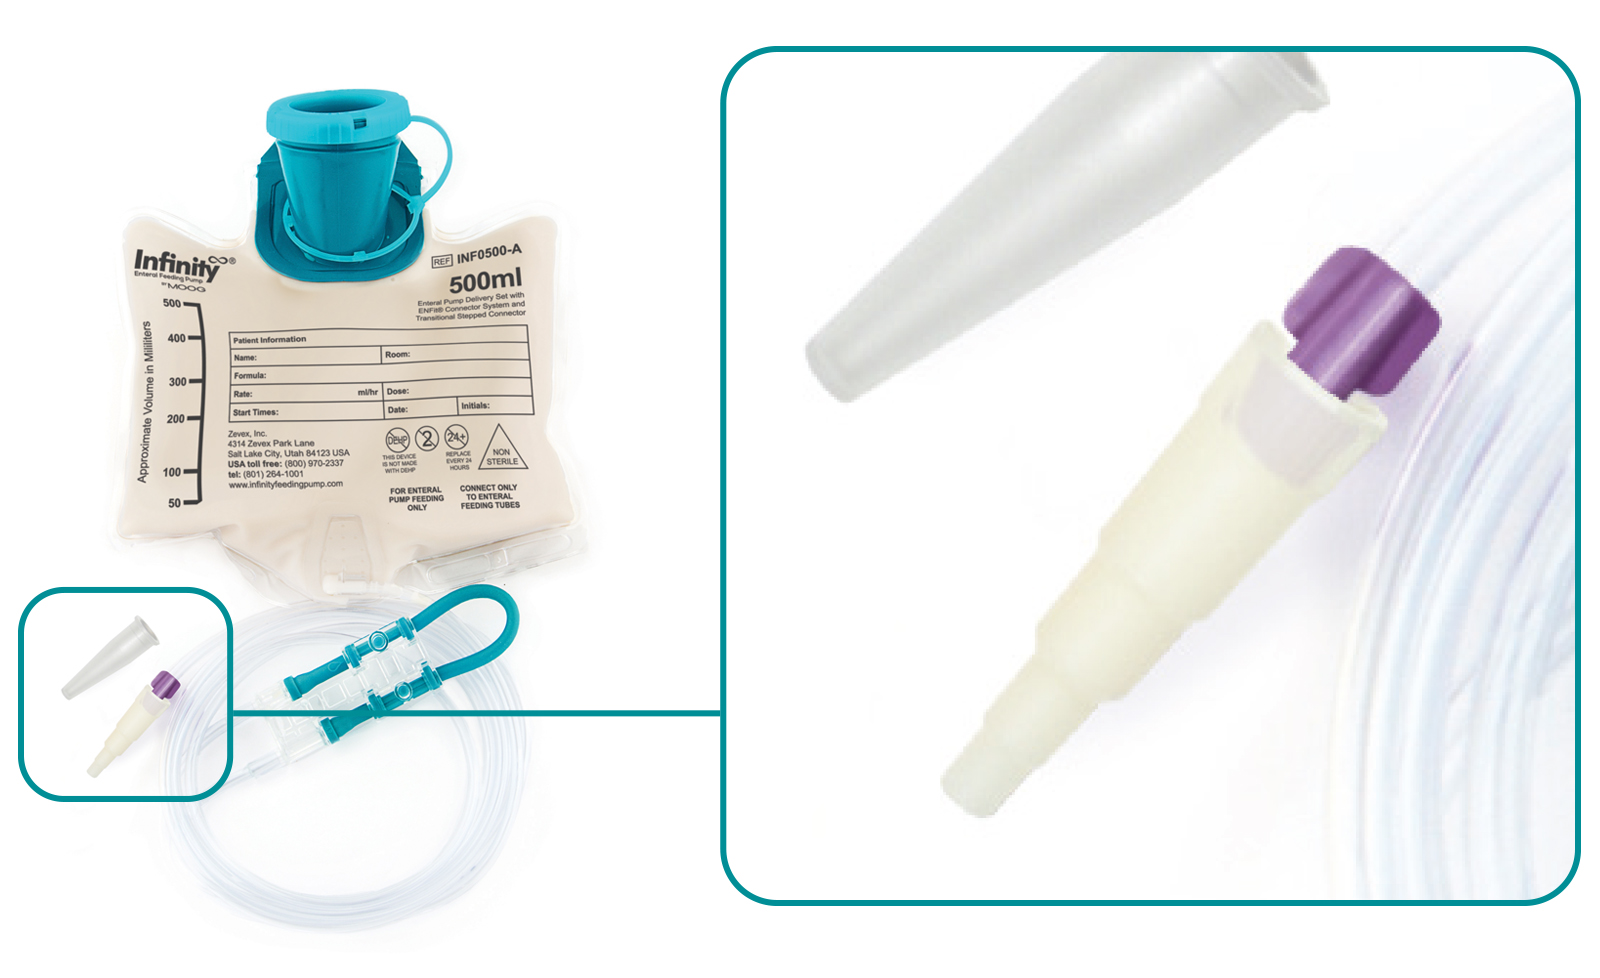 ENFit: Your Hook-Up on New Tube Feeding Connectors